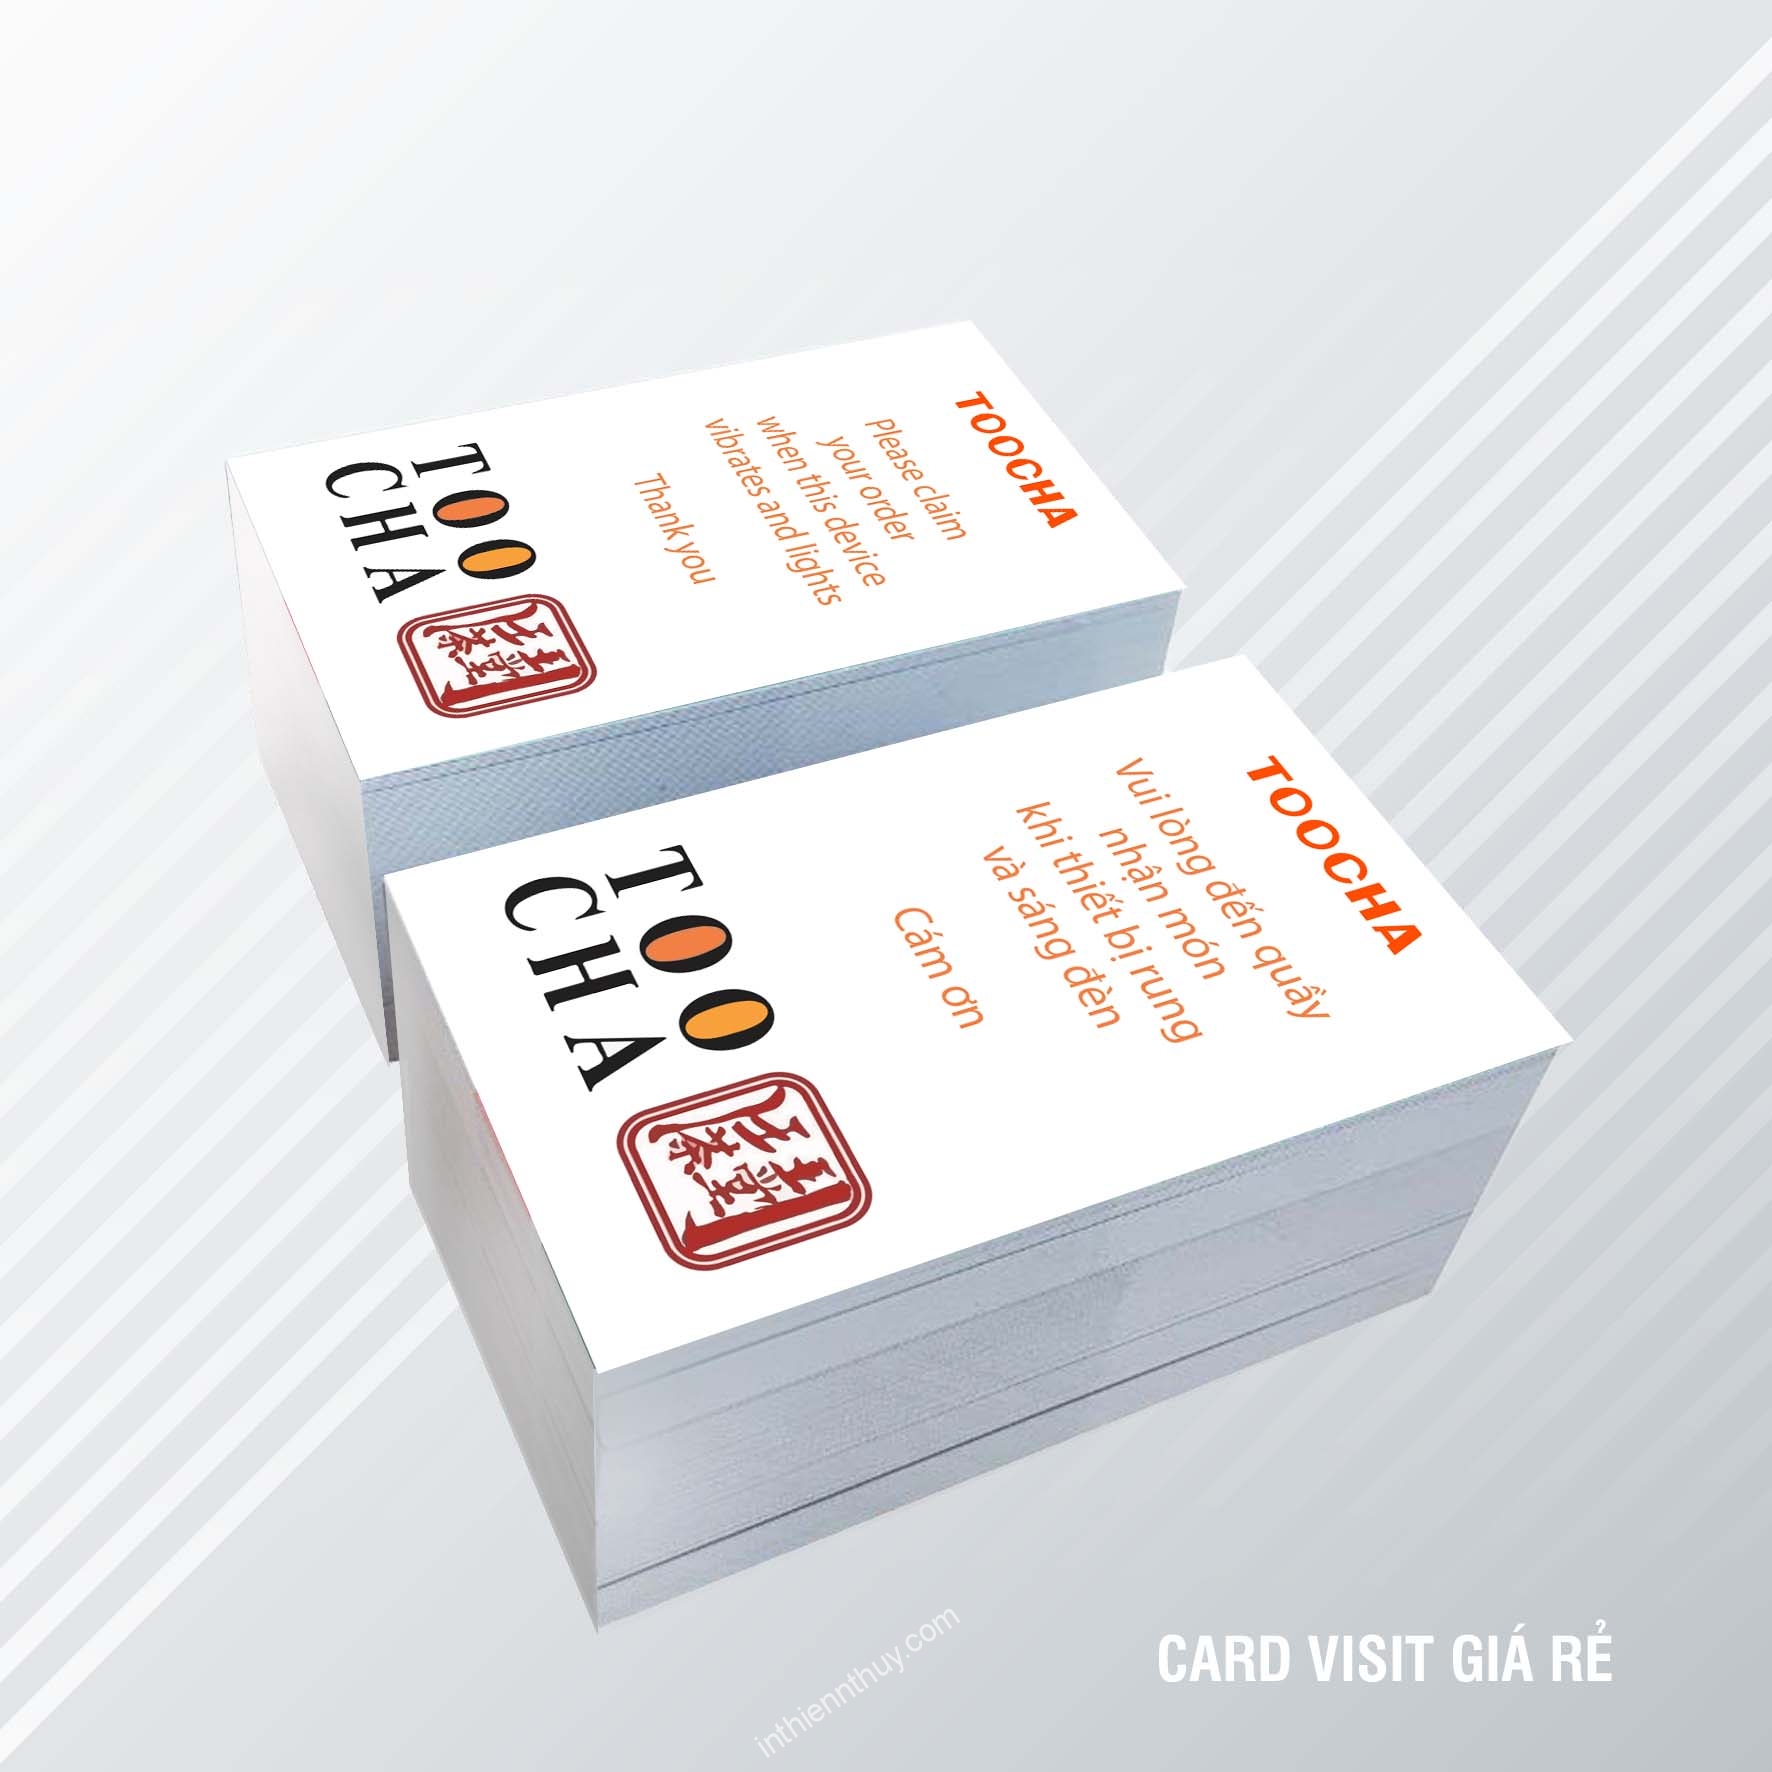 in_card_visit_gia_re